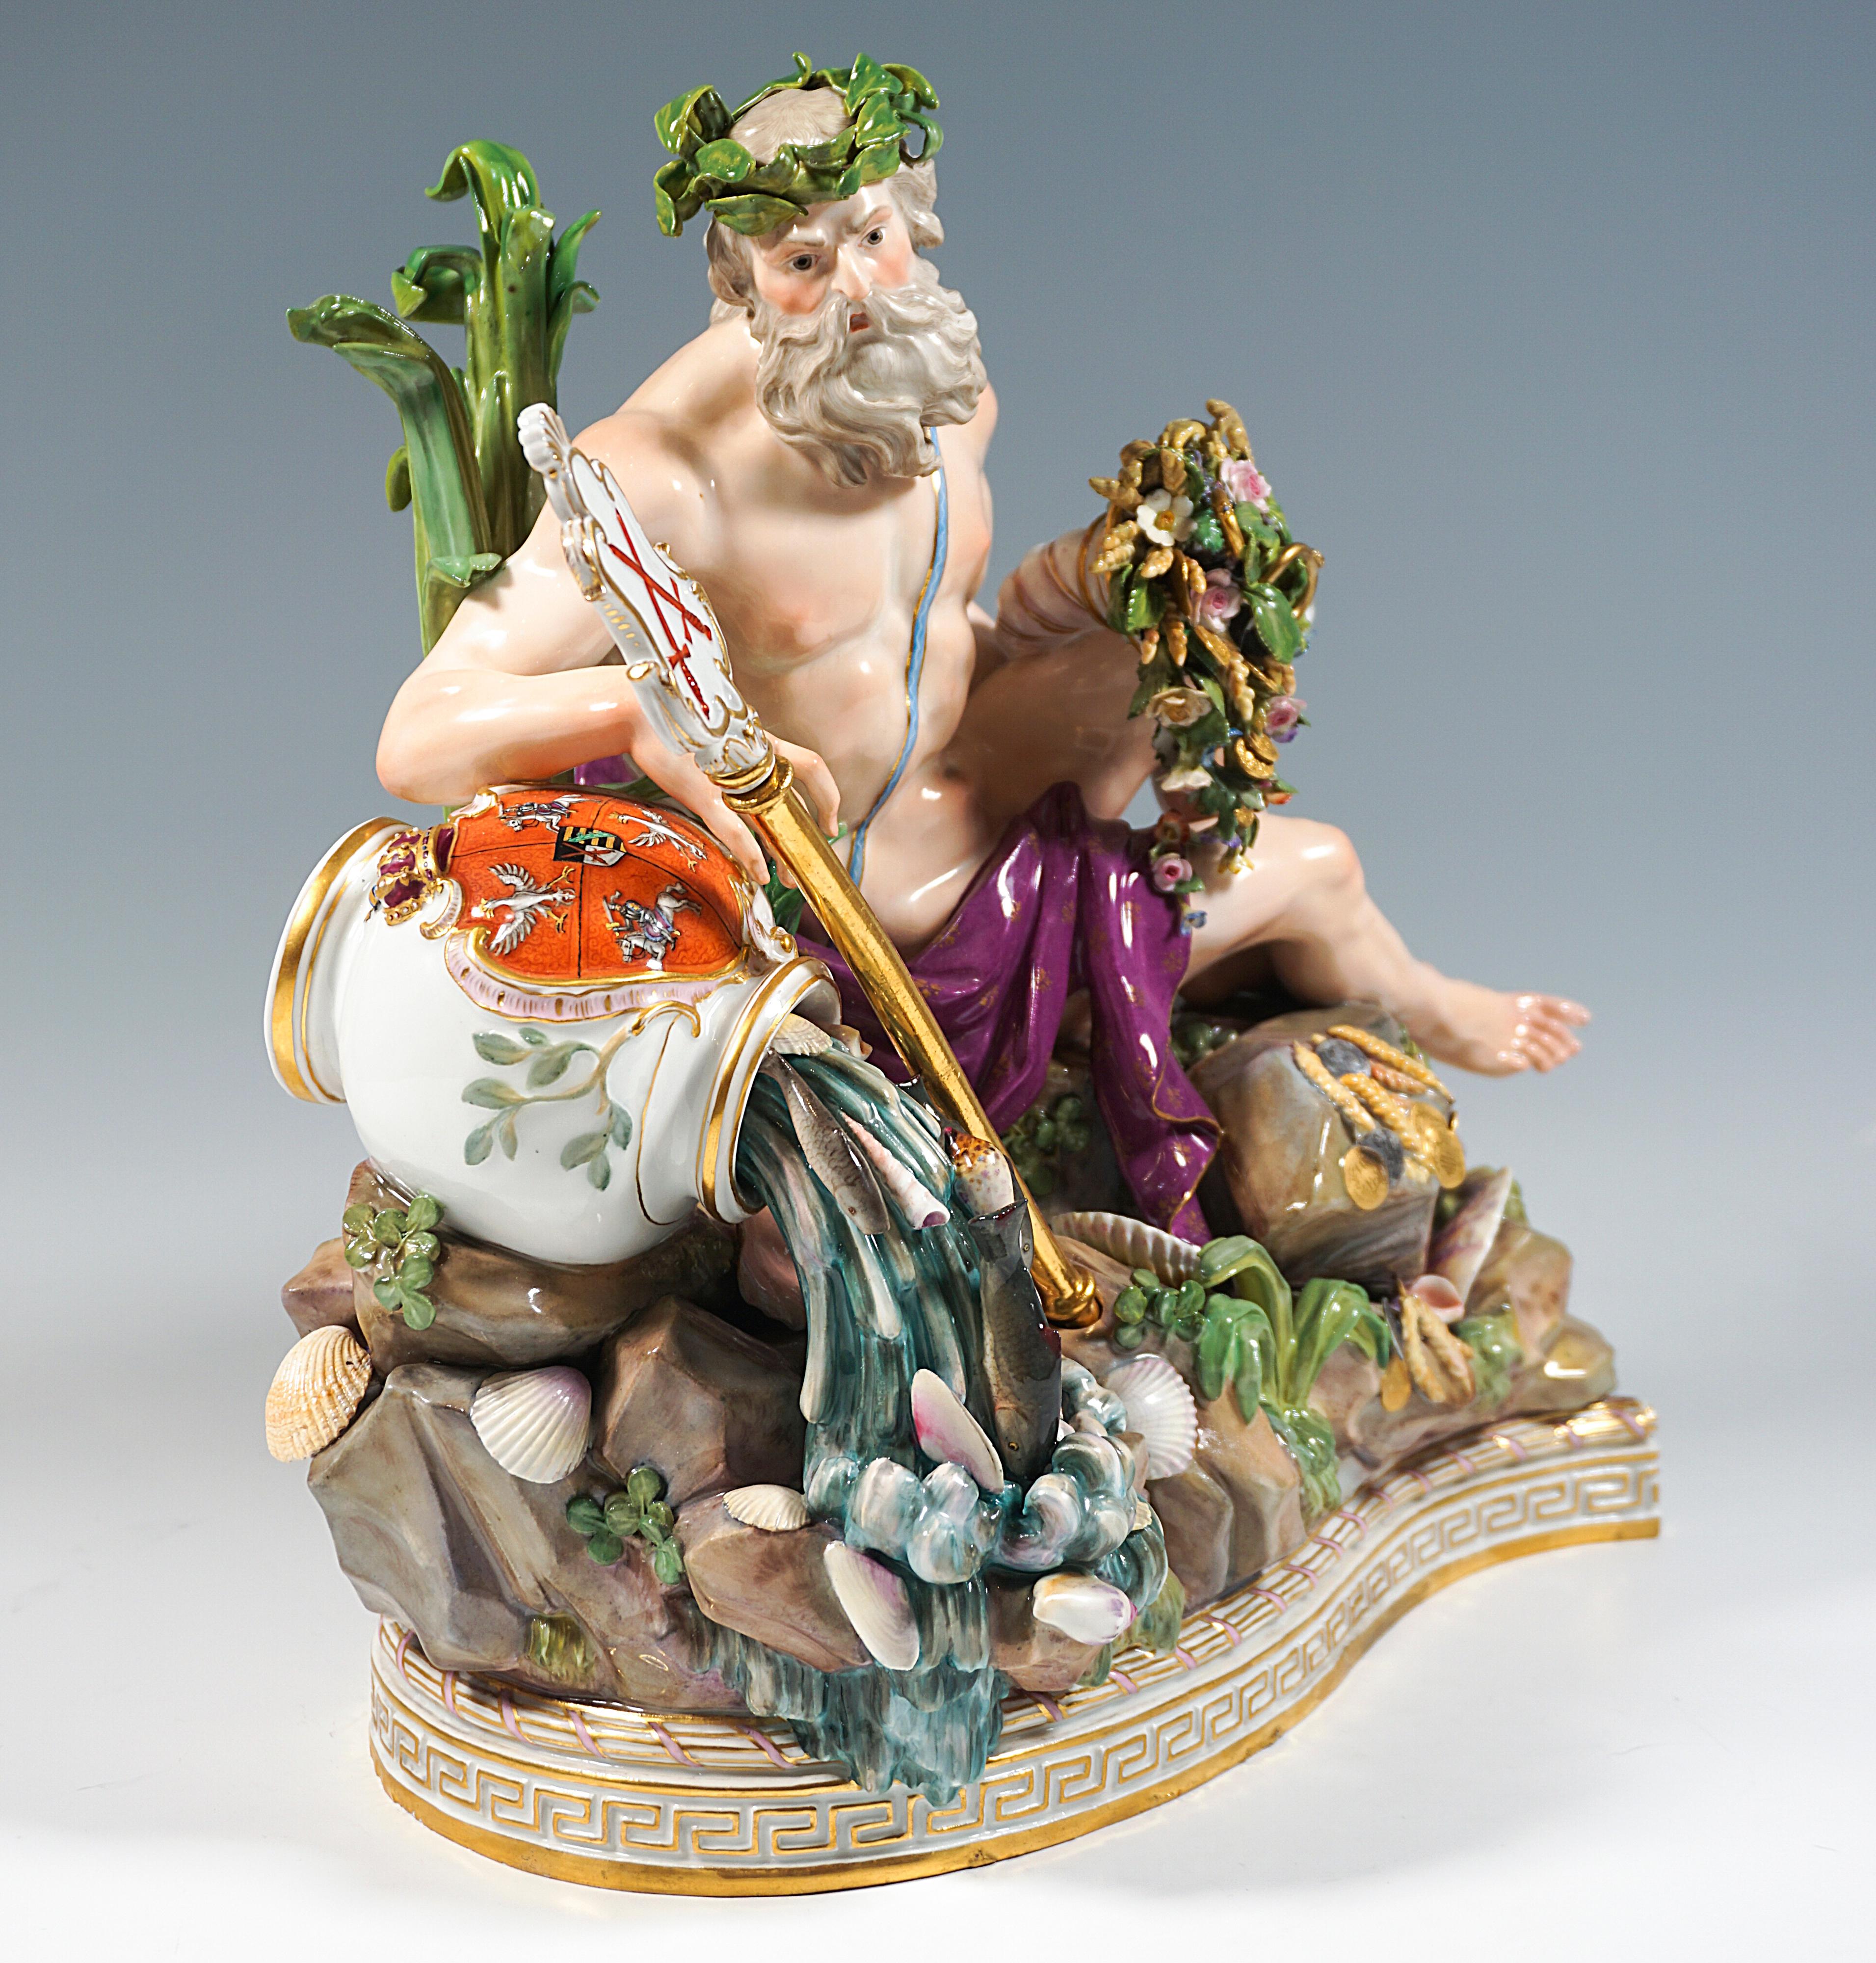 Very rare and excellent porcelain sculpture:
Kändler created this group in 1772, right at the beginning of the work on the large order, as a personification of one of the two great main 
rivers of the vast Russian Empire, the natural waterways Volga